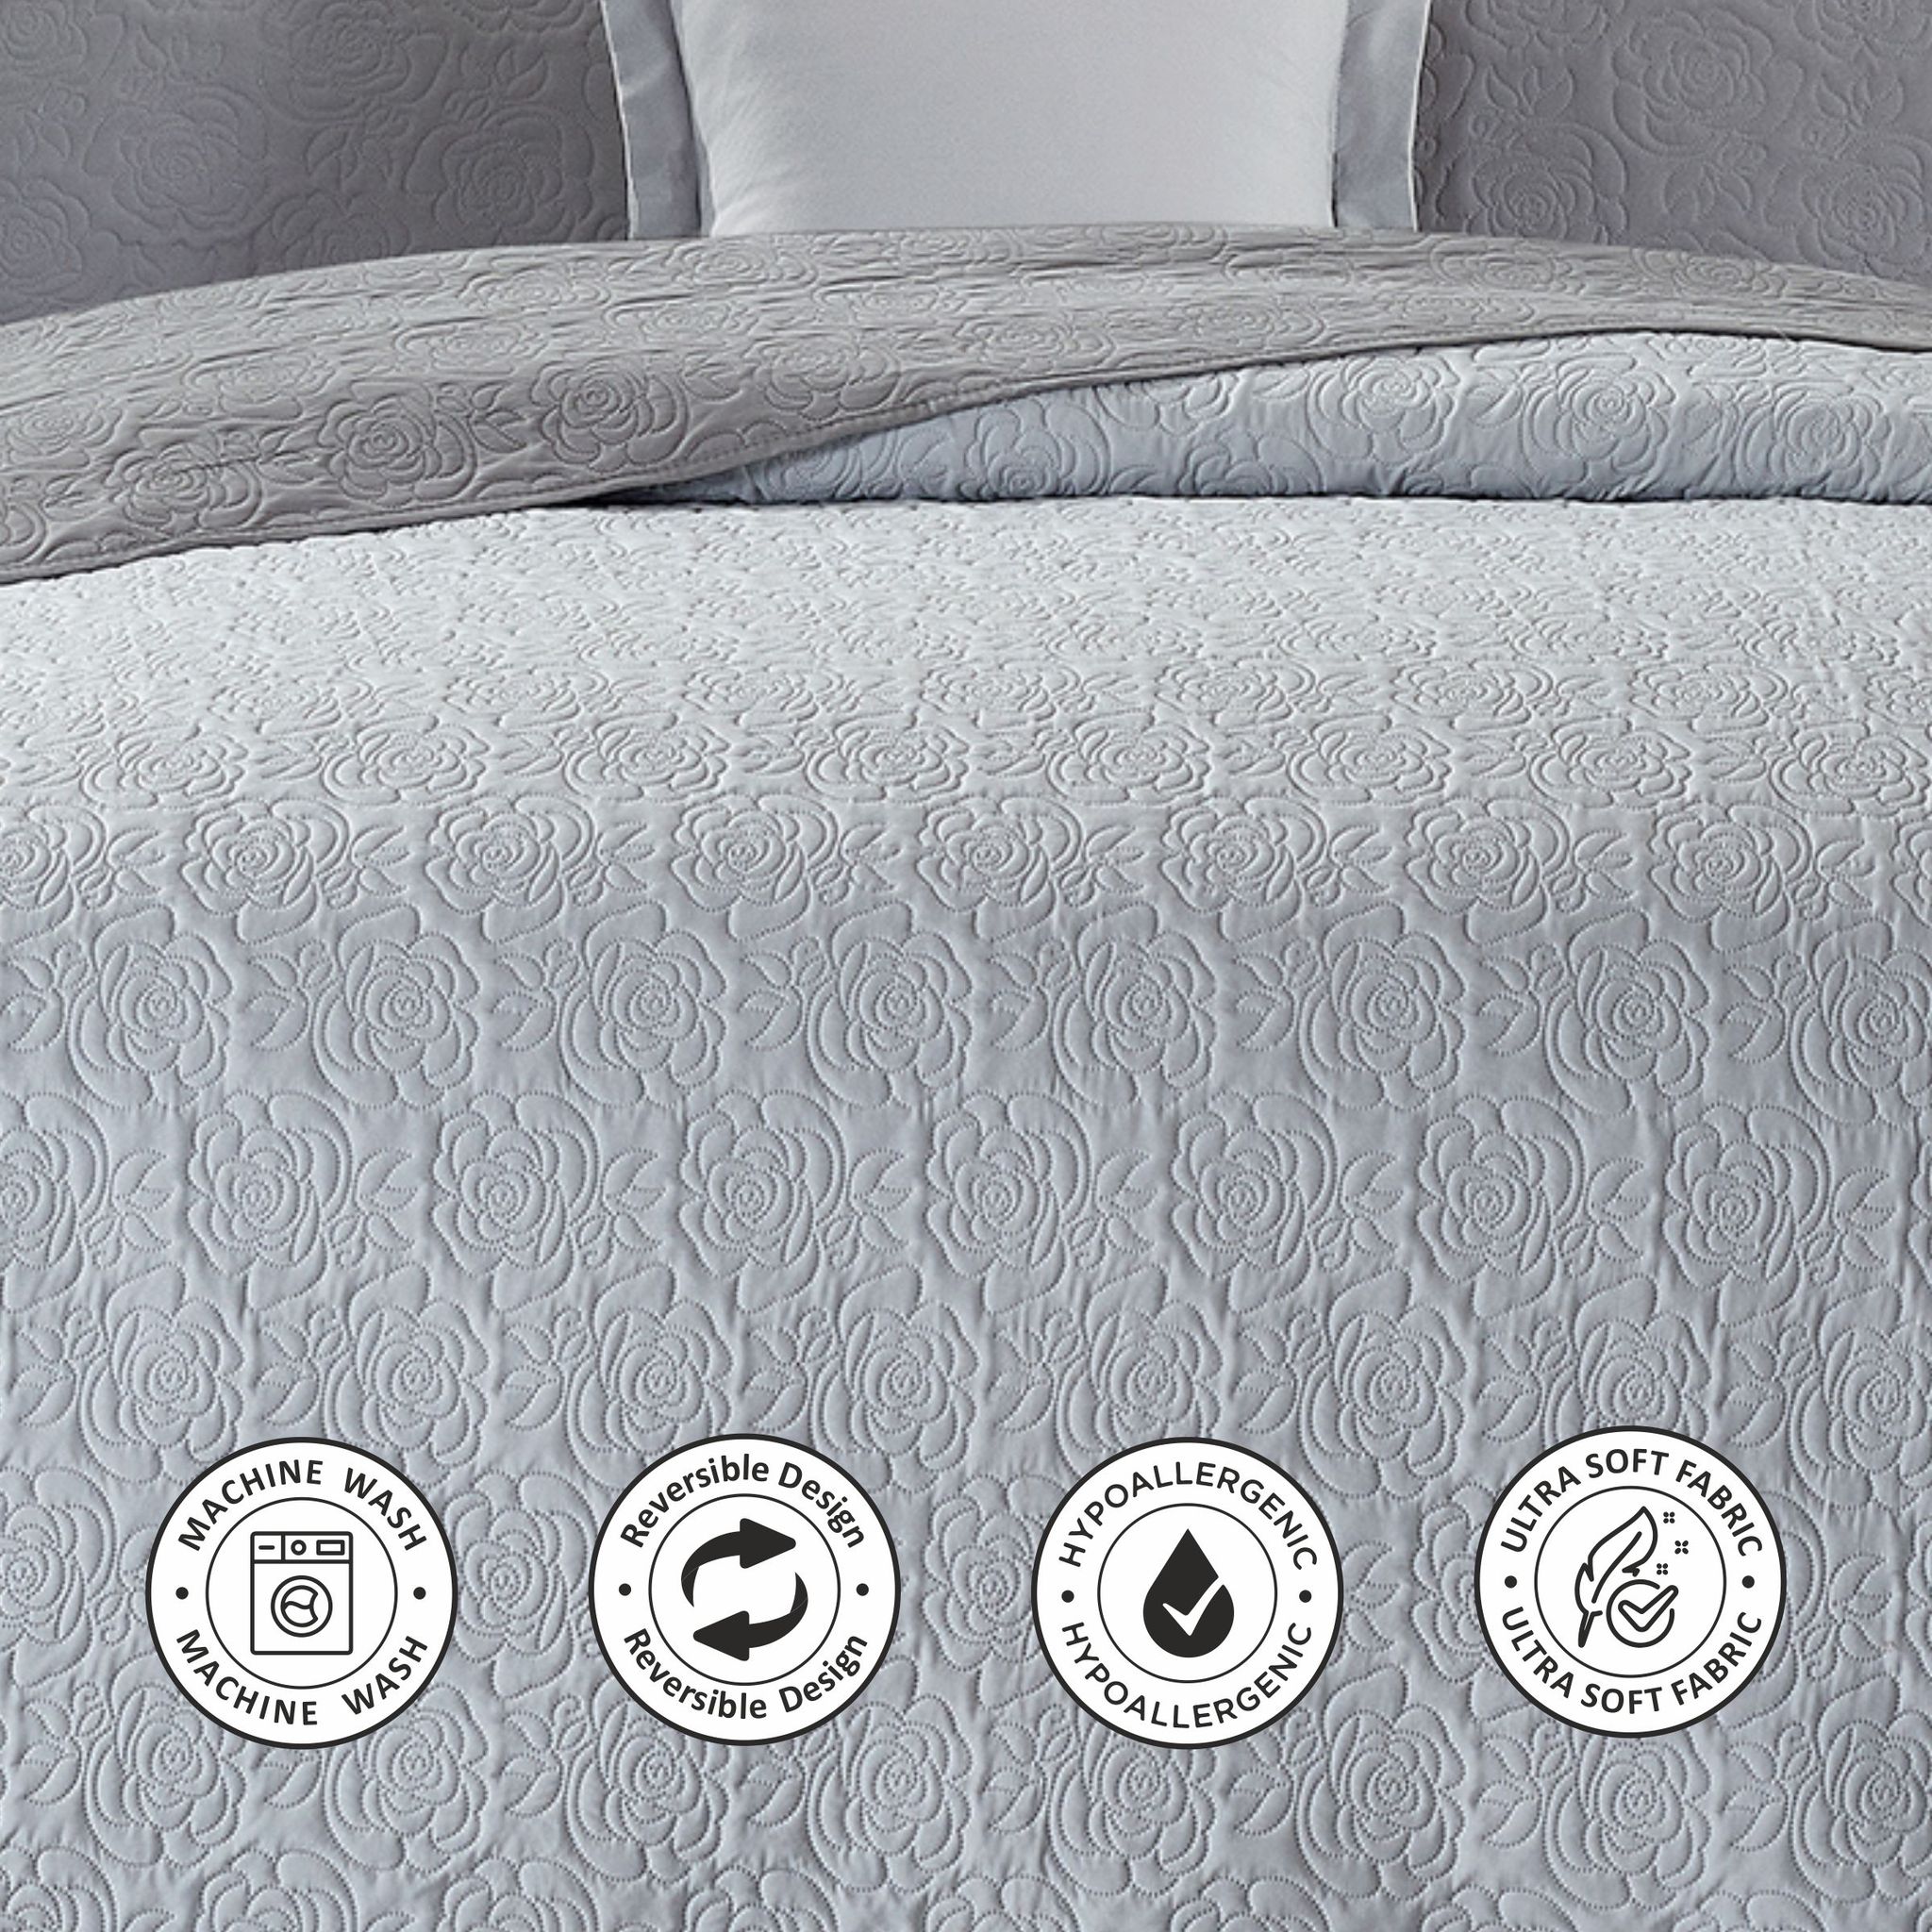 6-Piece Compressed Comforter Set Lightweight Bedspread For All Season - Microfiber Silver Grey - King Size 260x240 Cms